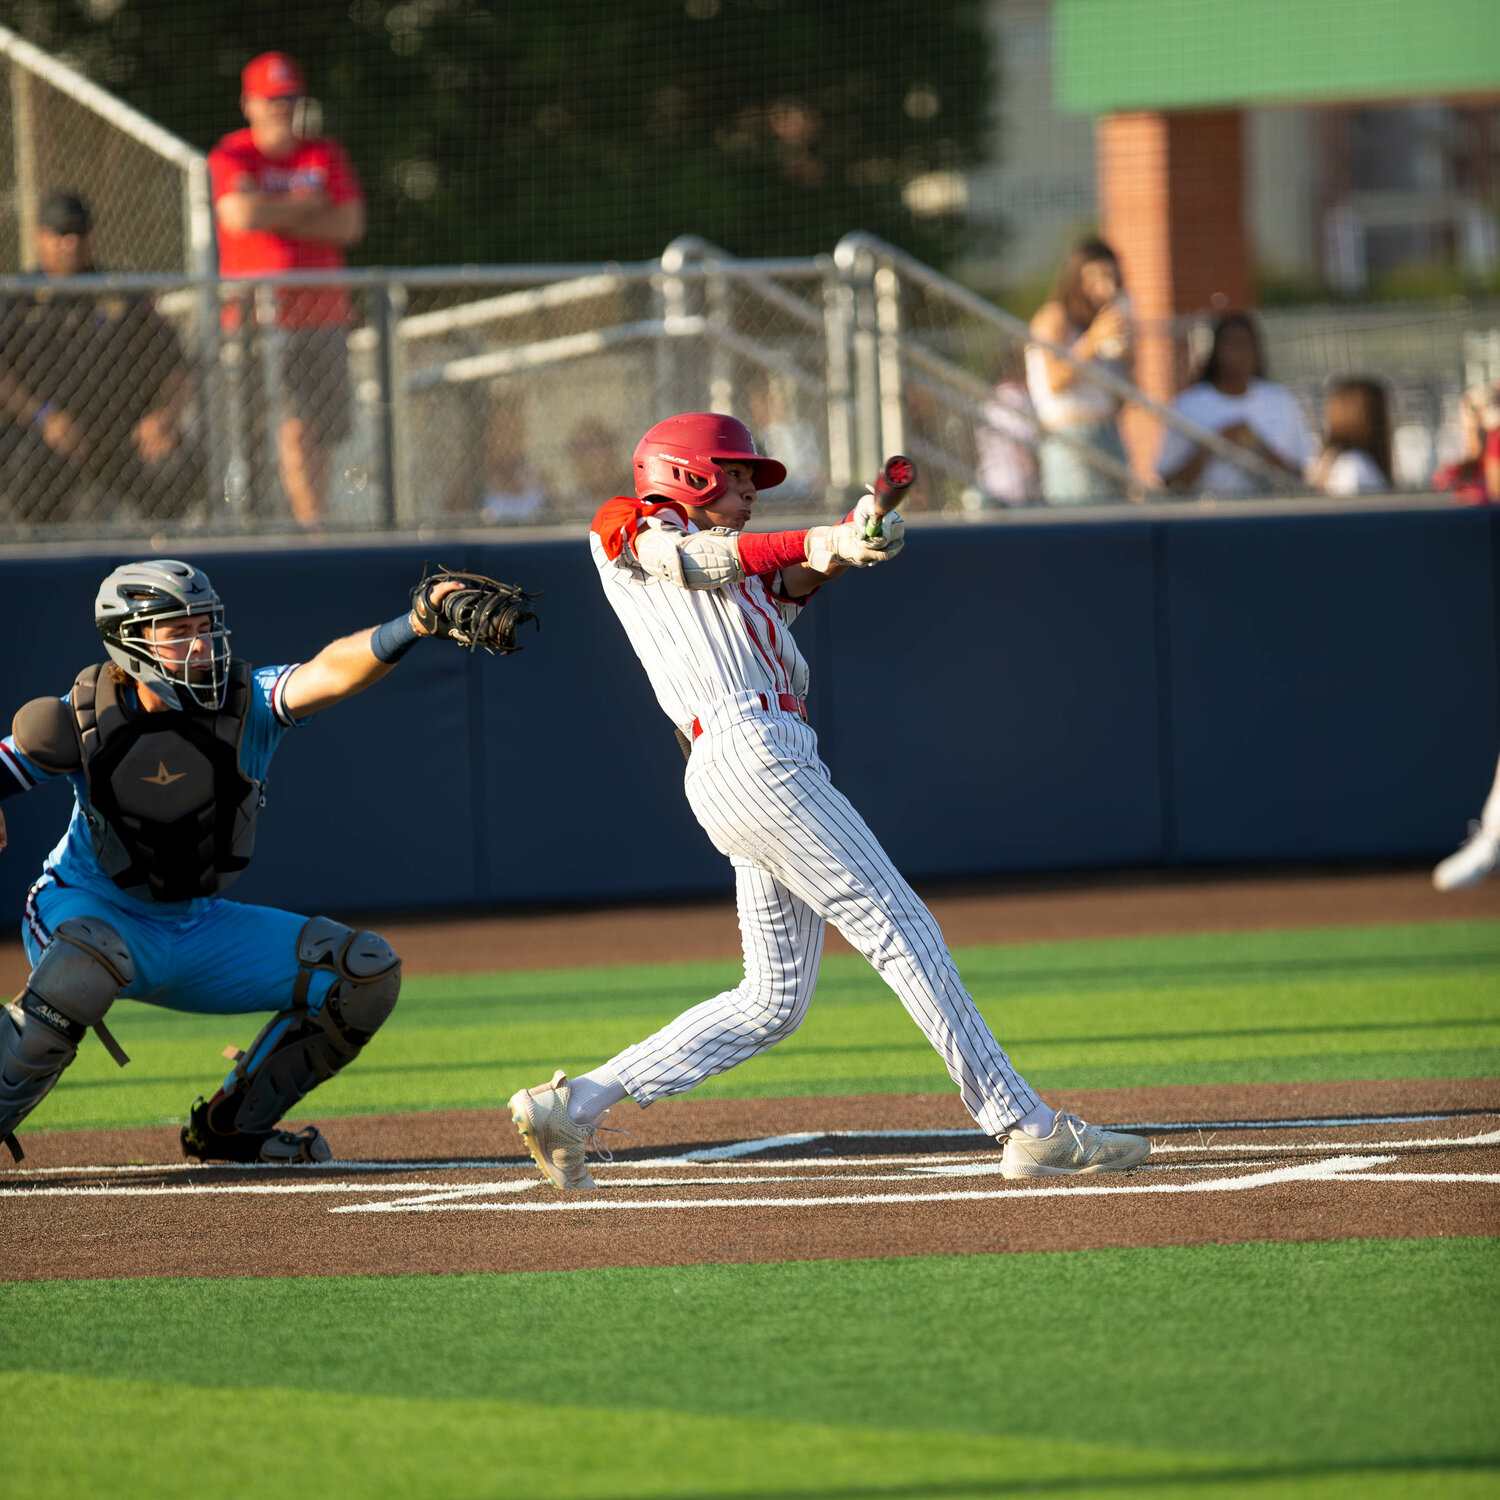 AJ Atkinson hits during Thursday's Regional Quarterfinal game between Katy and Tompkins at Cy-Springs.